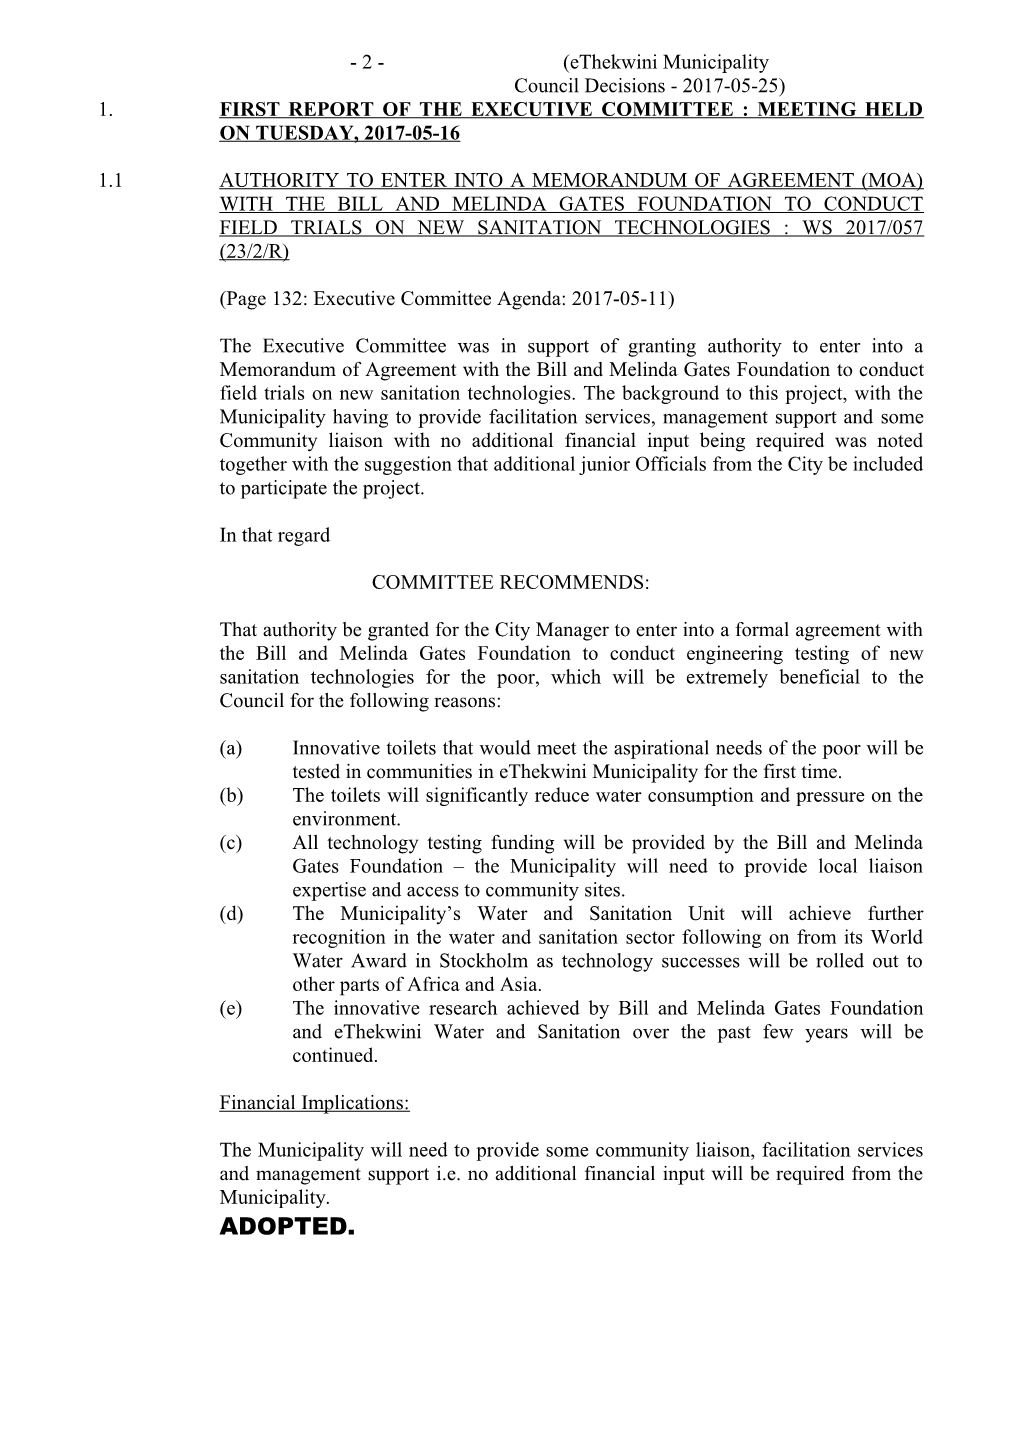 Council Decision Circular : Meeting Held on 2017-05-25